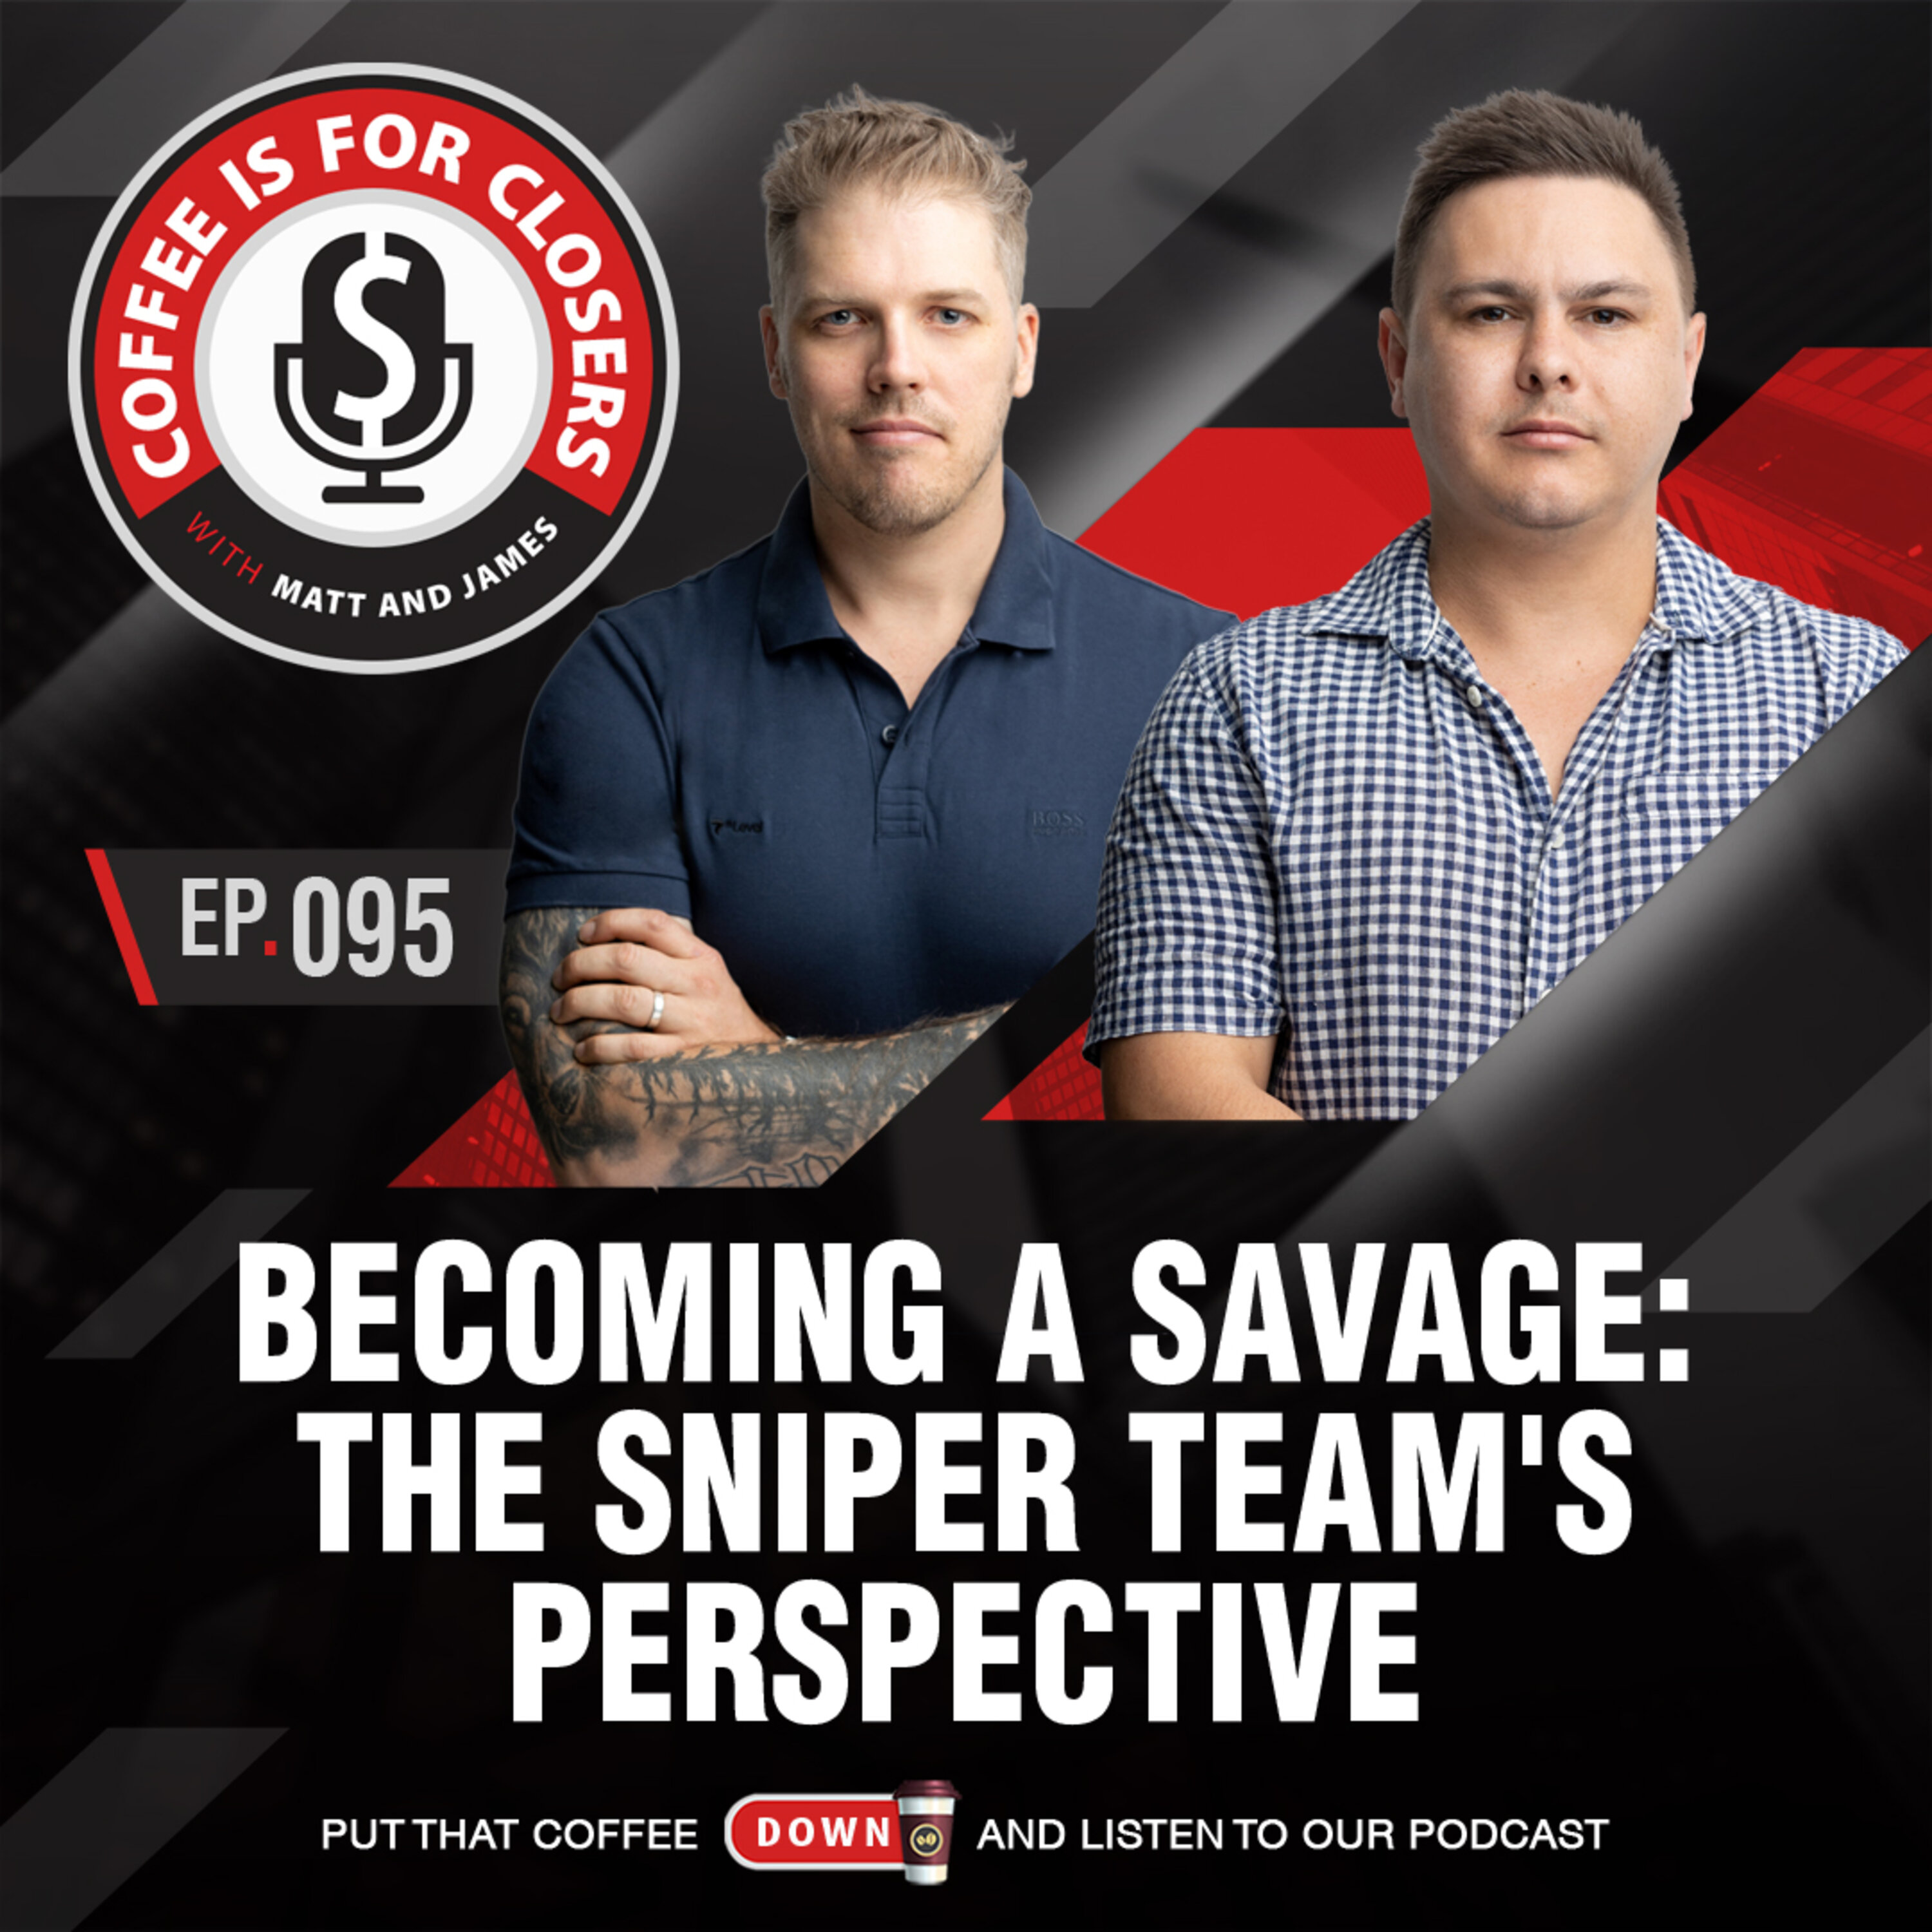 Becoming a Savage: The Sniper Team's Perspective